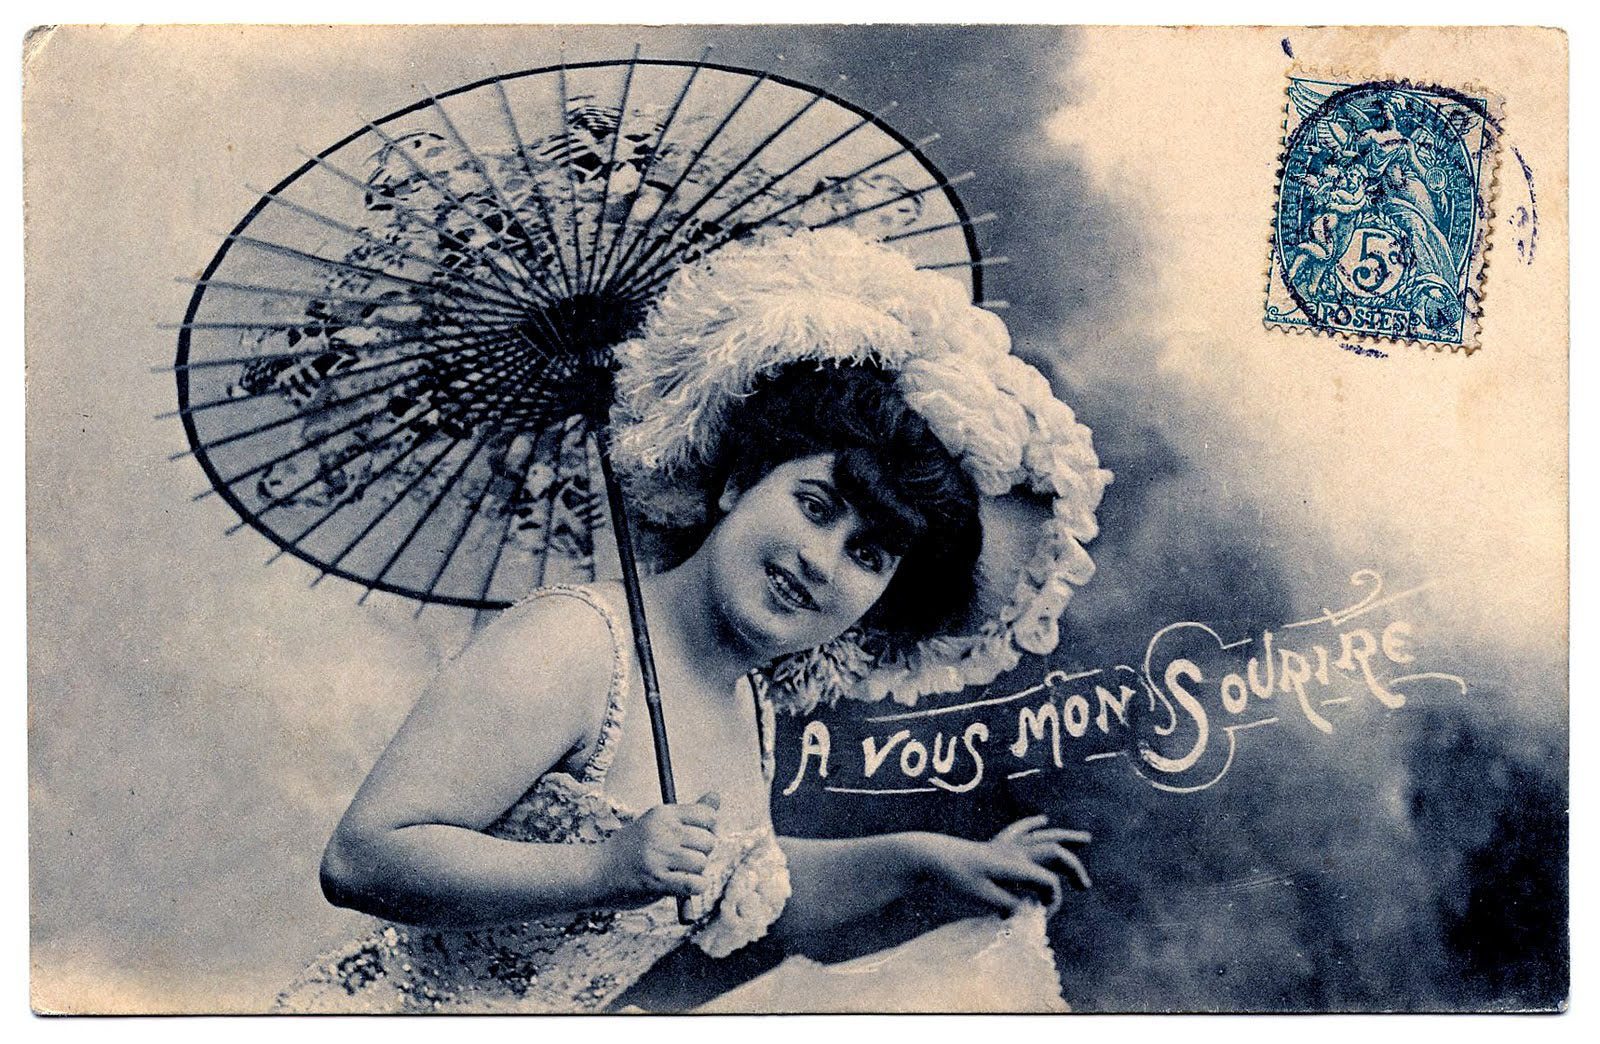 French ladies. Французские певицы ретро. Ретро открытки Франция. Woman with a Parasol. French girls 1920s.